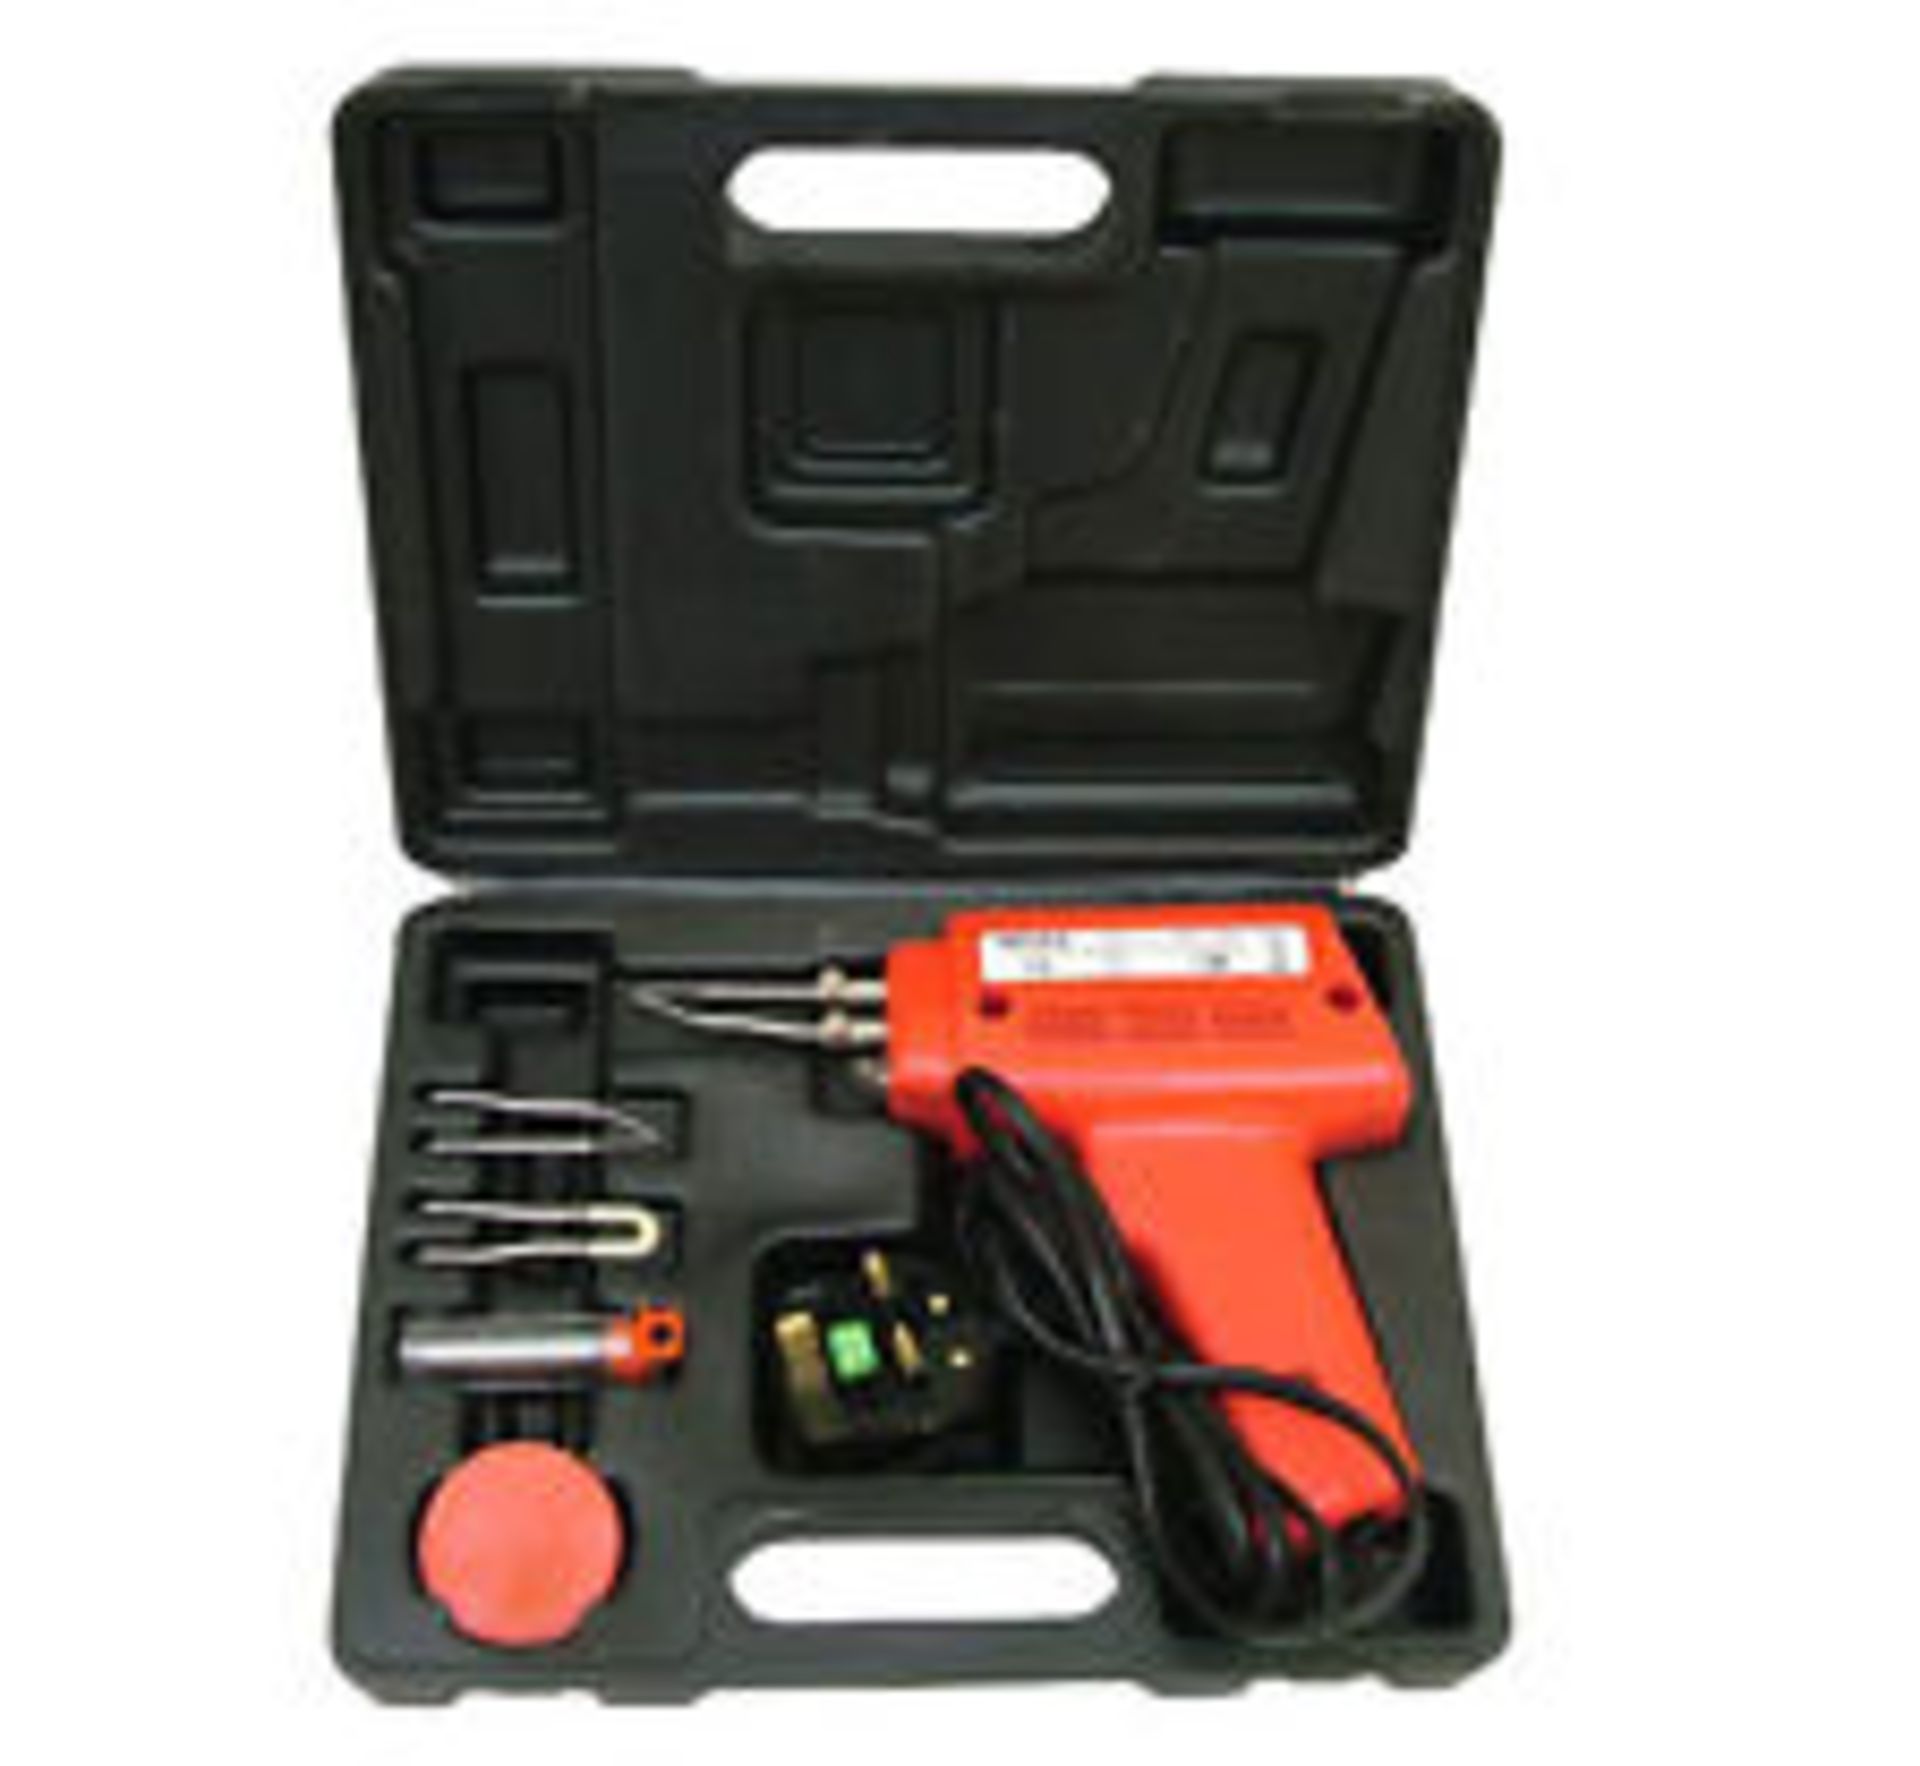 V Brand New 175 Watt Electric Soldering Gun Kit X 2 YOUR BID PRICE TO BE MULTIPLIED BY TWO